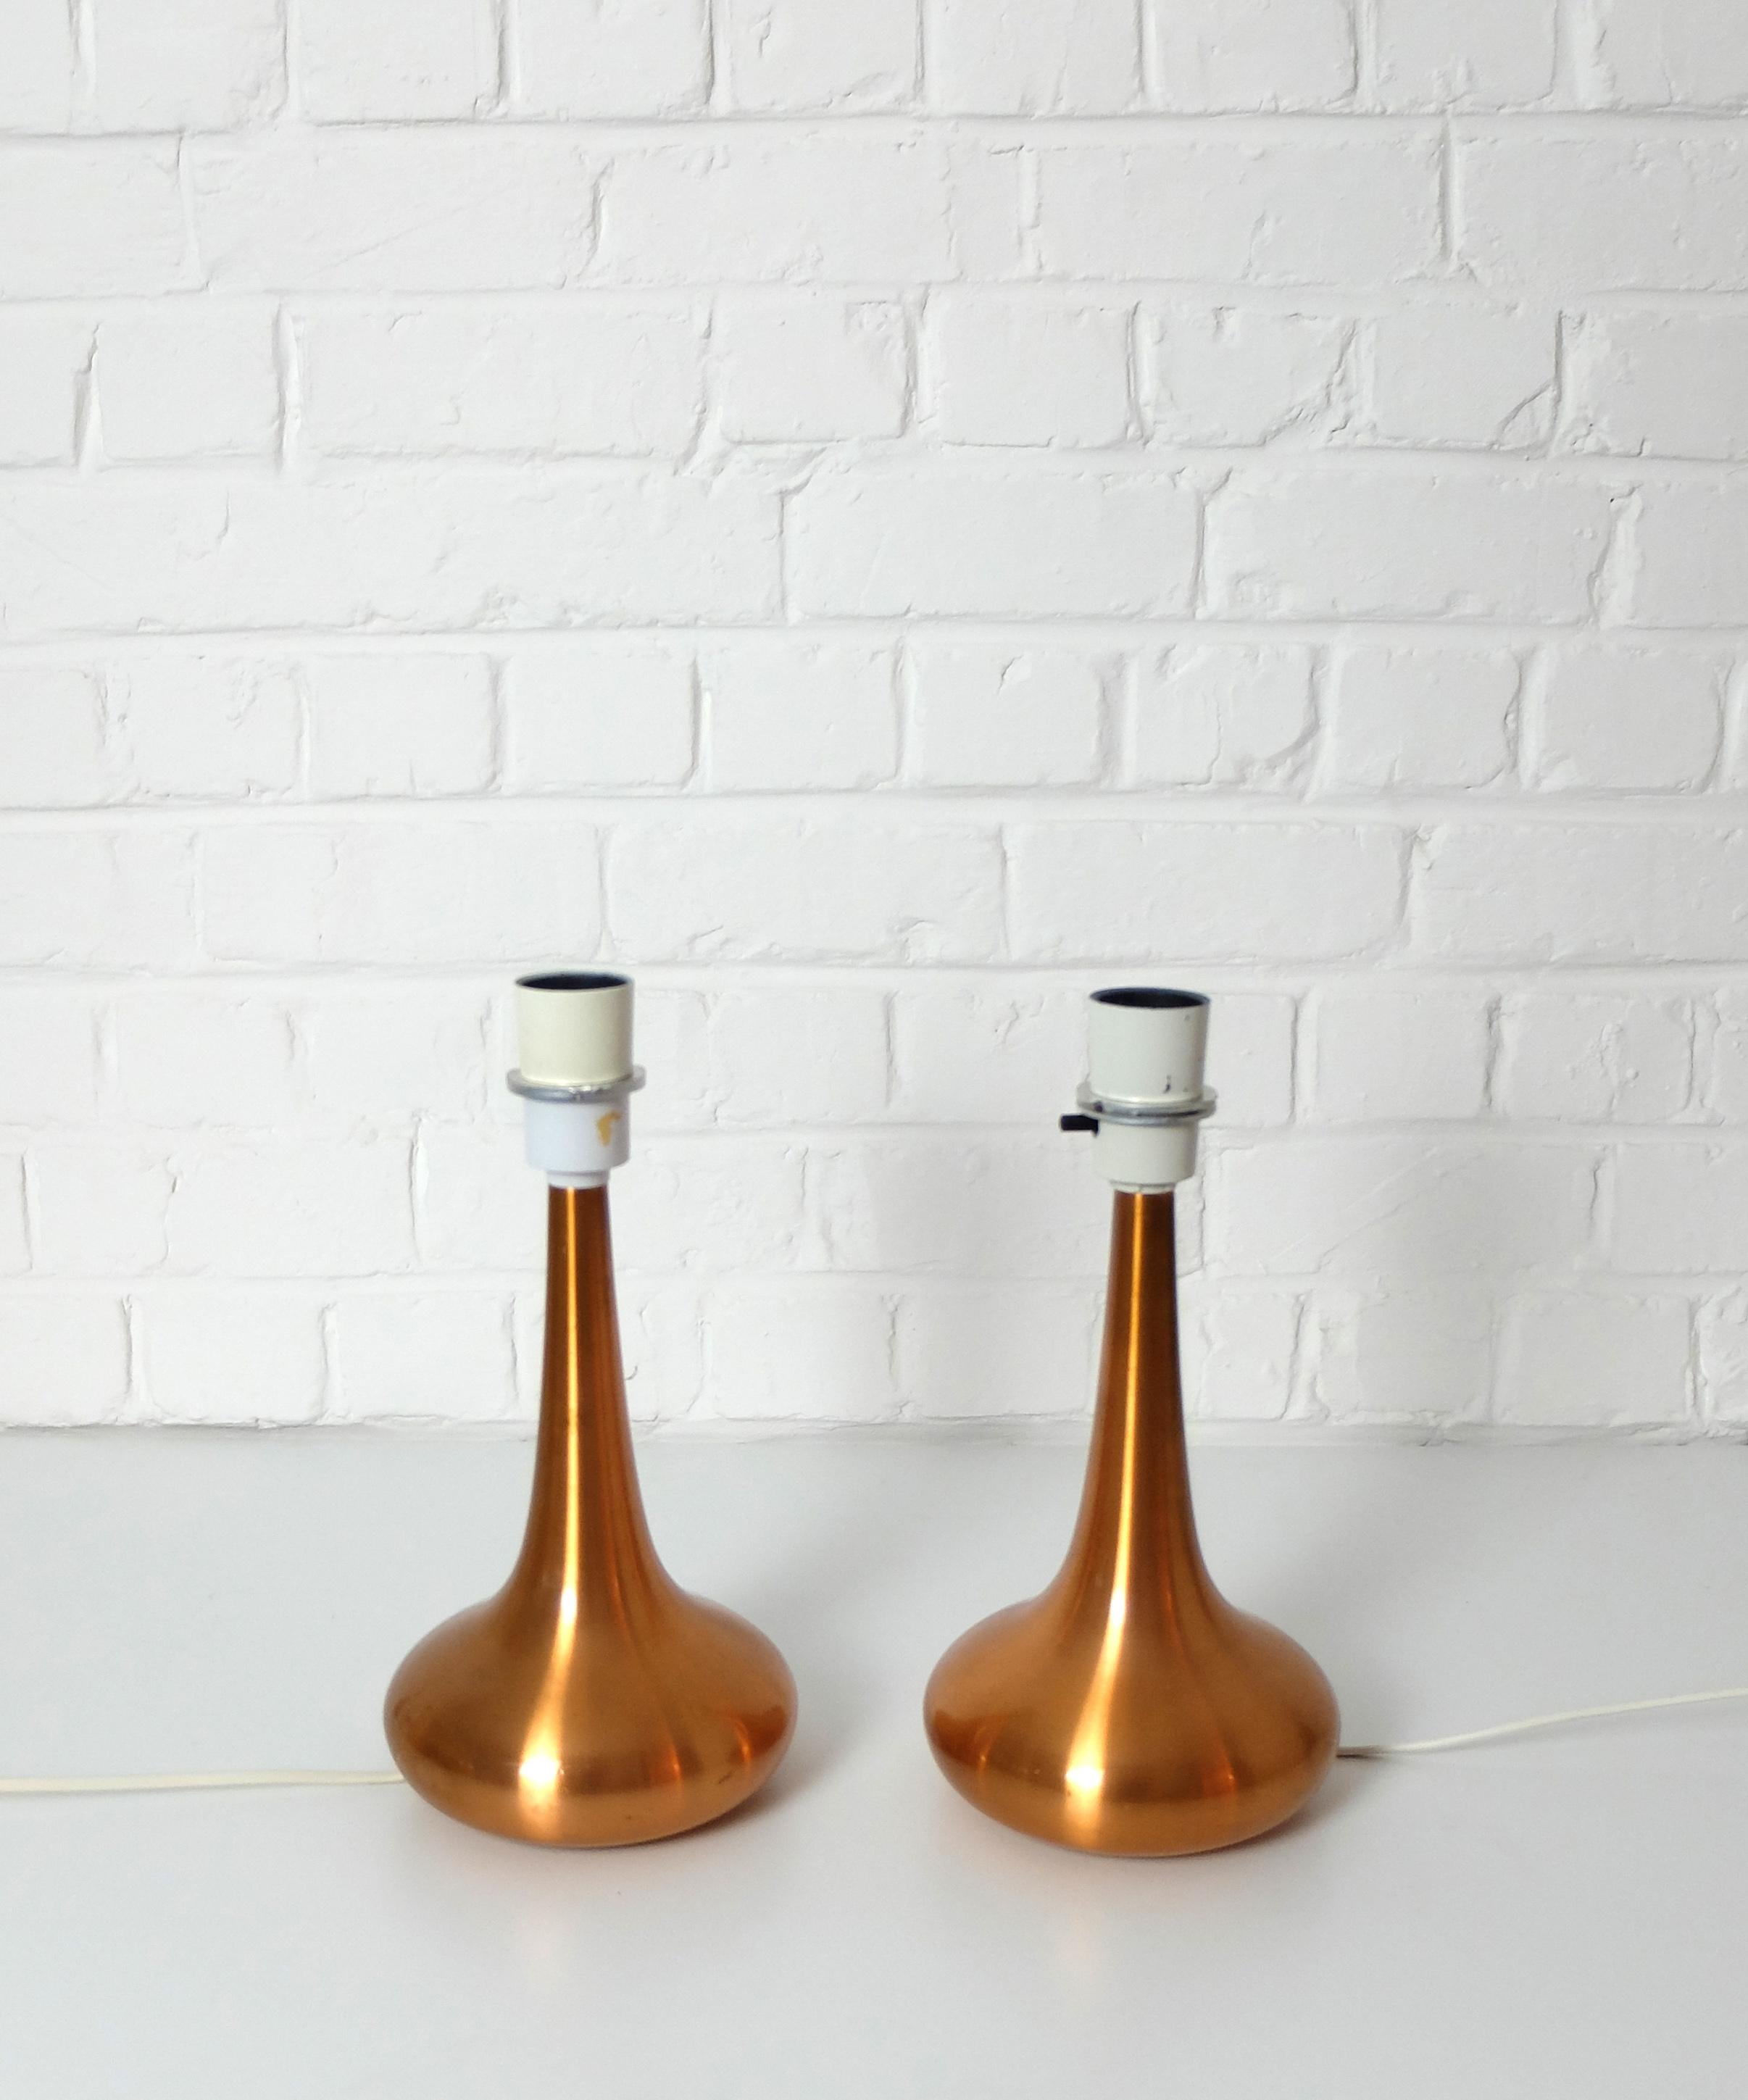 Pair of Danish Orient Table Lamps in Copper by Jo Hammerborg, Fog & Mørup, 1960s For Sale 6